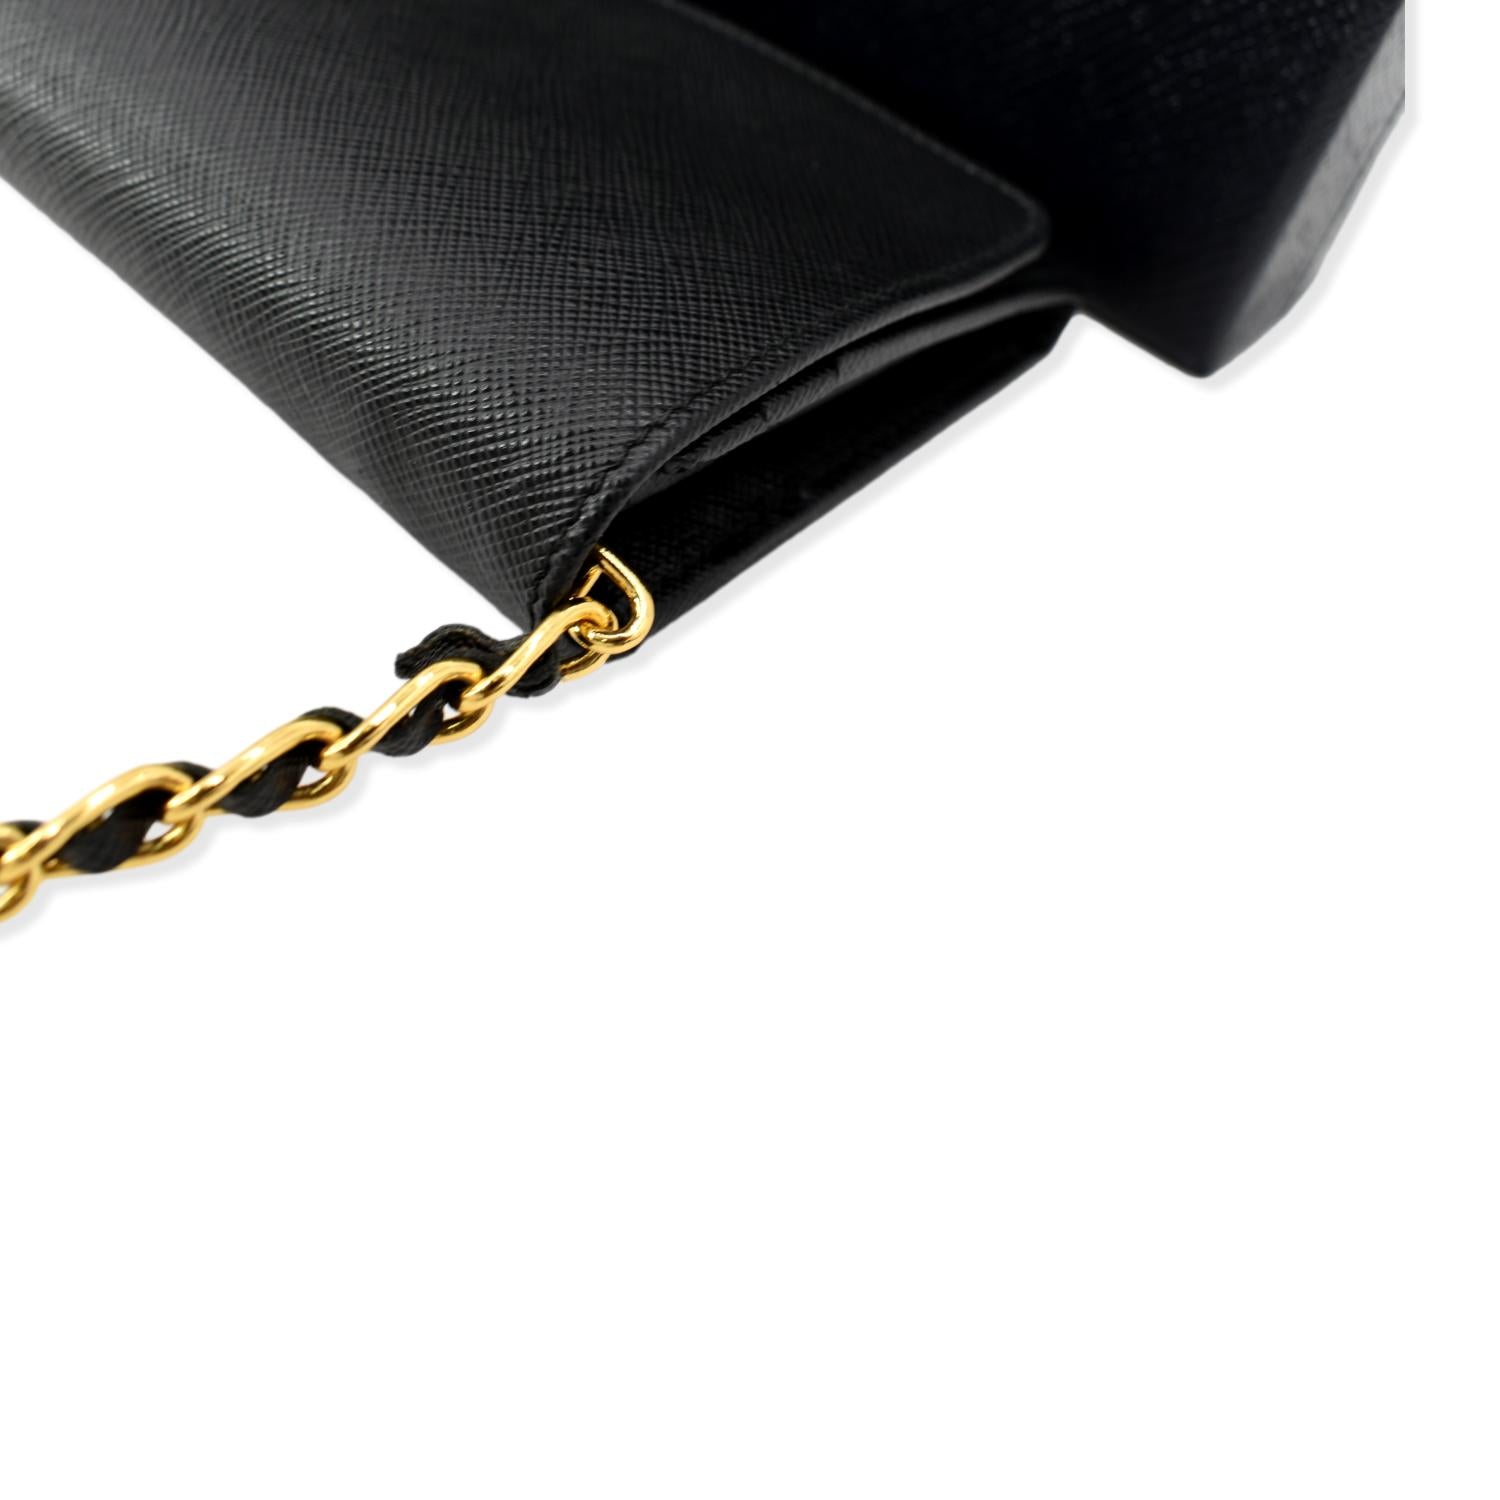 Prada Saffiano Leather Wallet with Chain